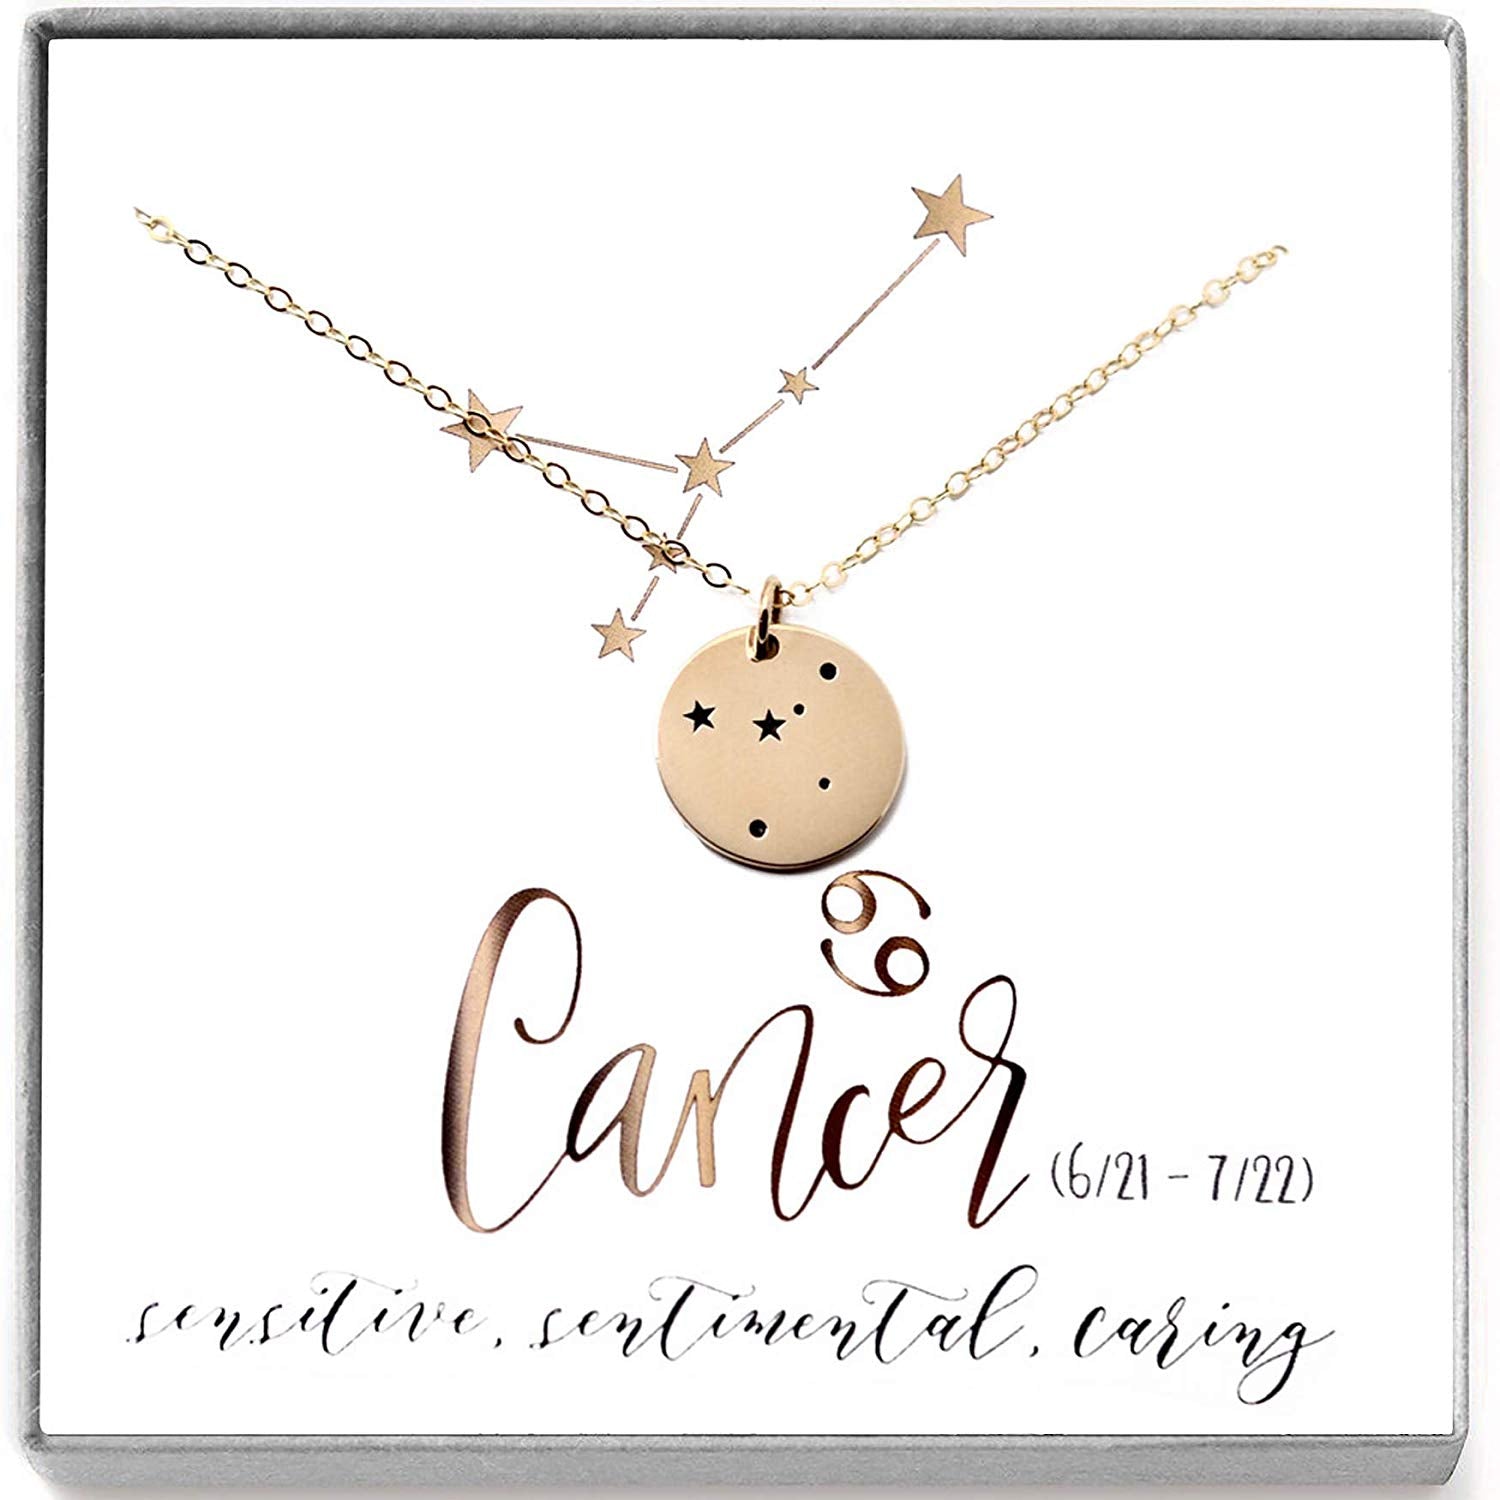 Petite Cancer Zodiac Necklace with Diamond in Yellow Gold by Liven Co